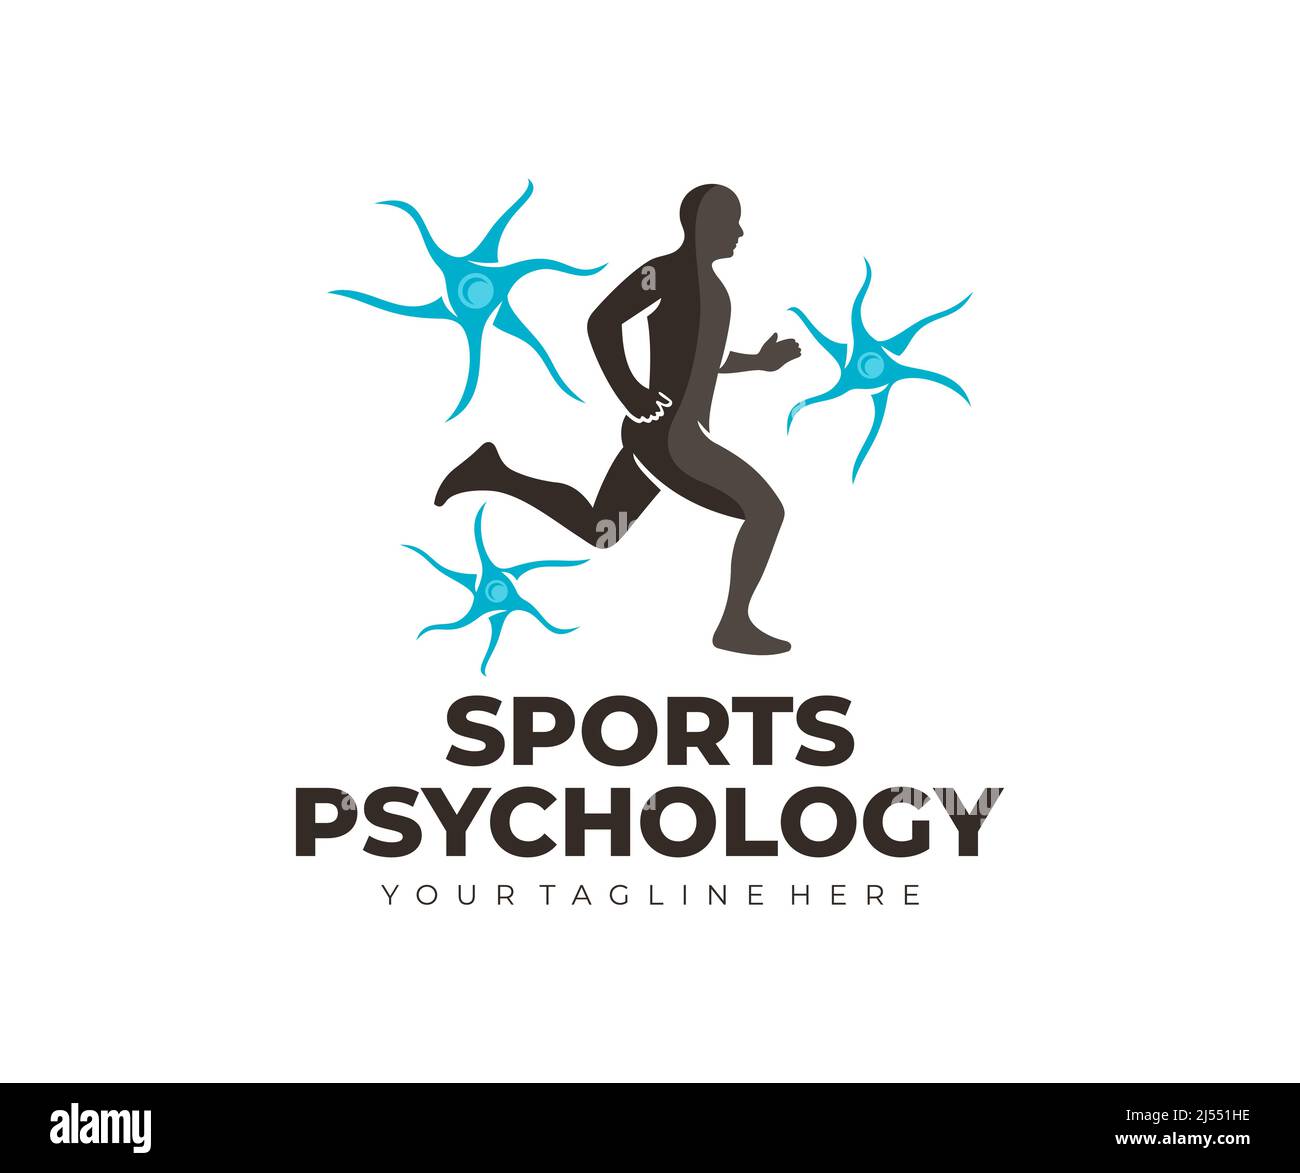 Sports psychology, neurons, runner and sports, logo design. Active lifestyle, mental function, medicine and neurology, vector design and illustration Stock Vector